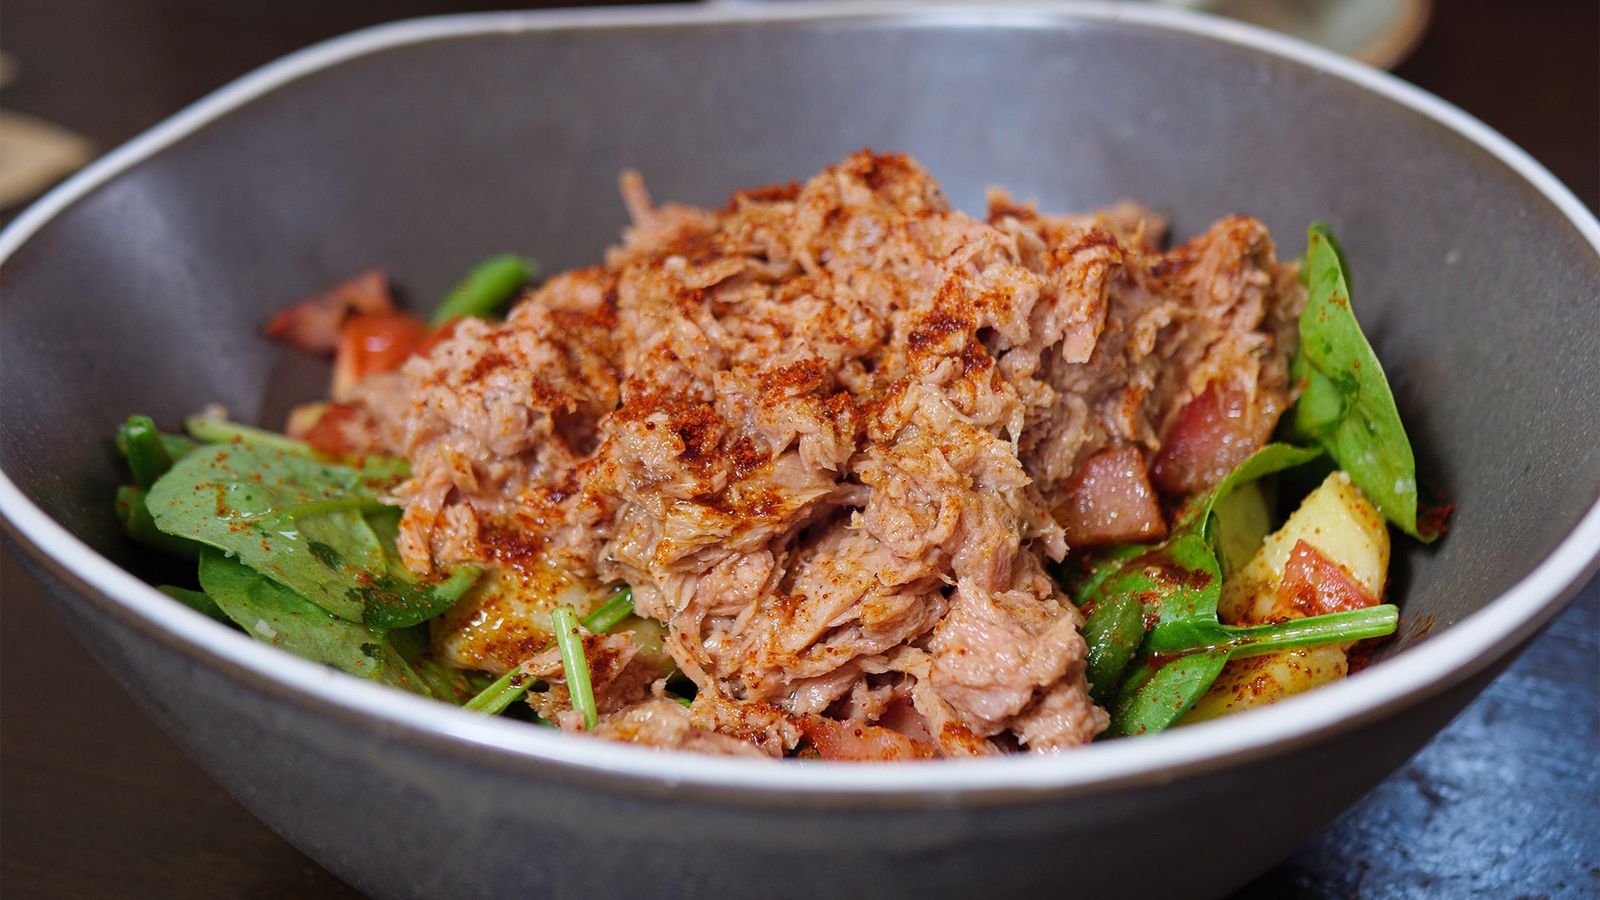 Close-up photo of a tuna salad with potatoes, tomatoes, spinach, and green beans sprinkled with smoked paprika seasoning and served in a grey bowl.